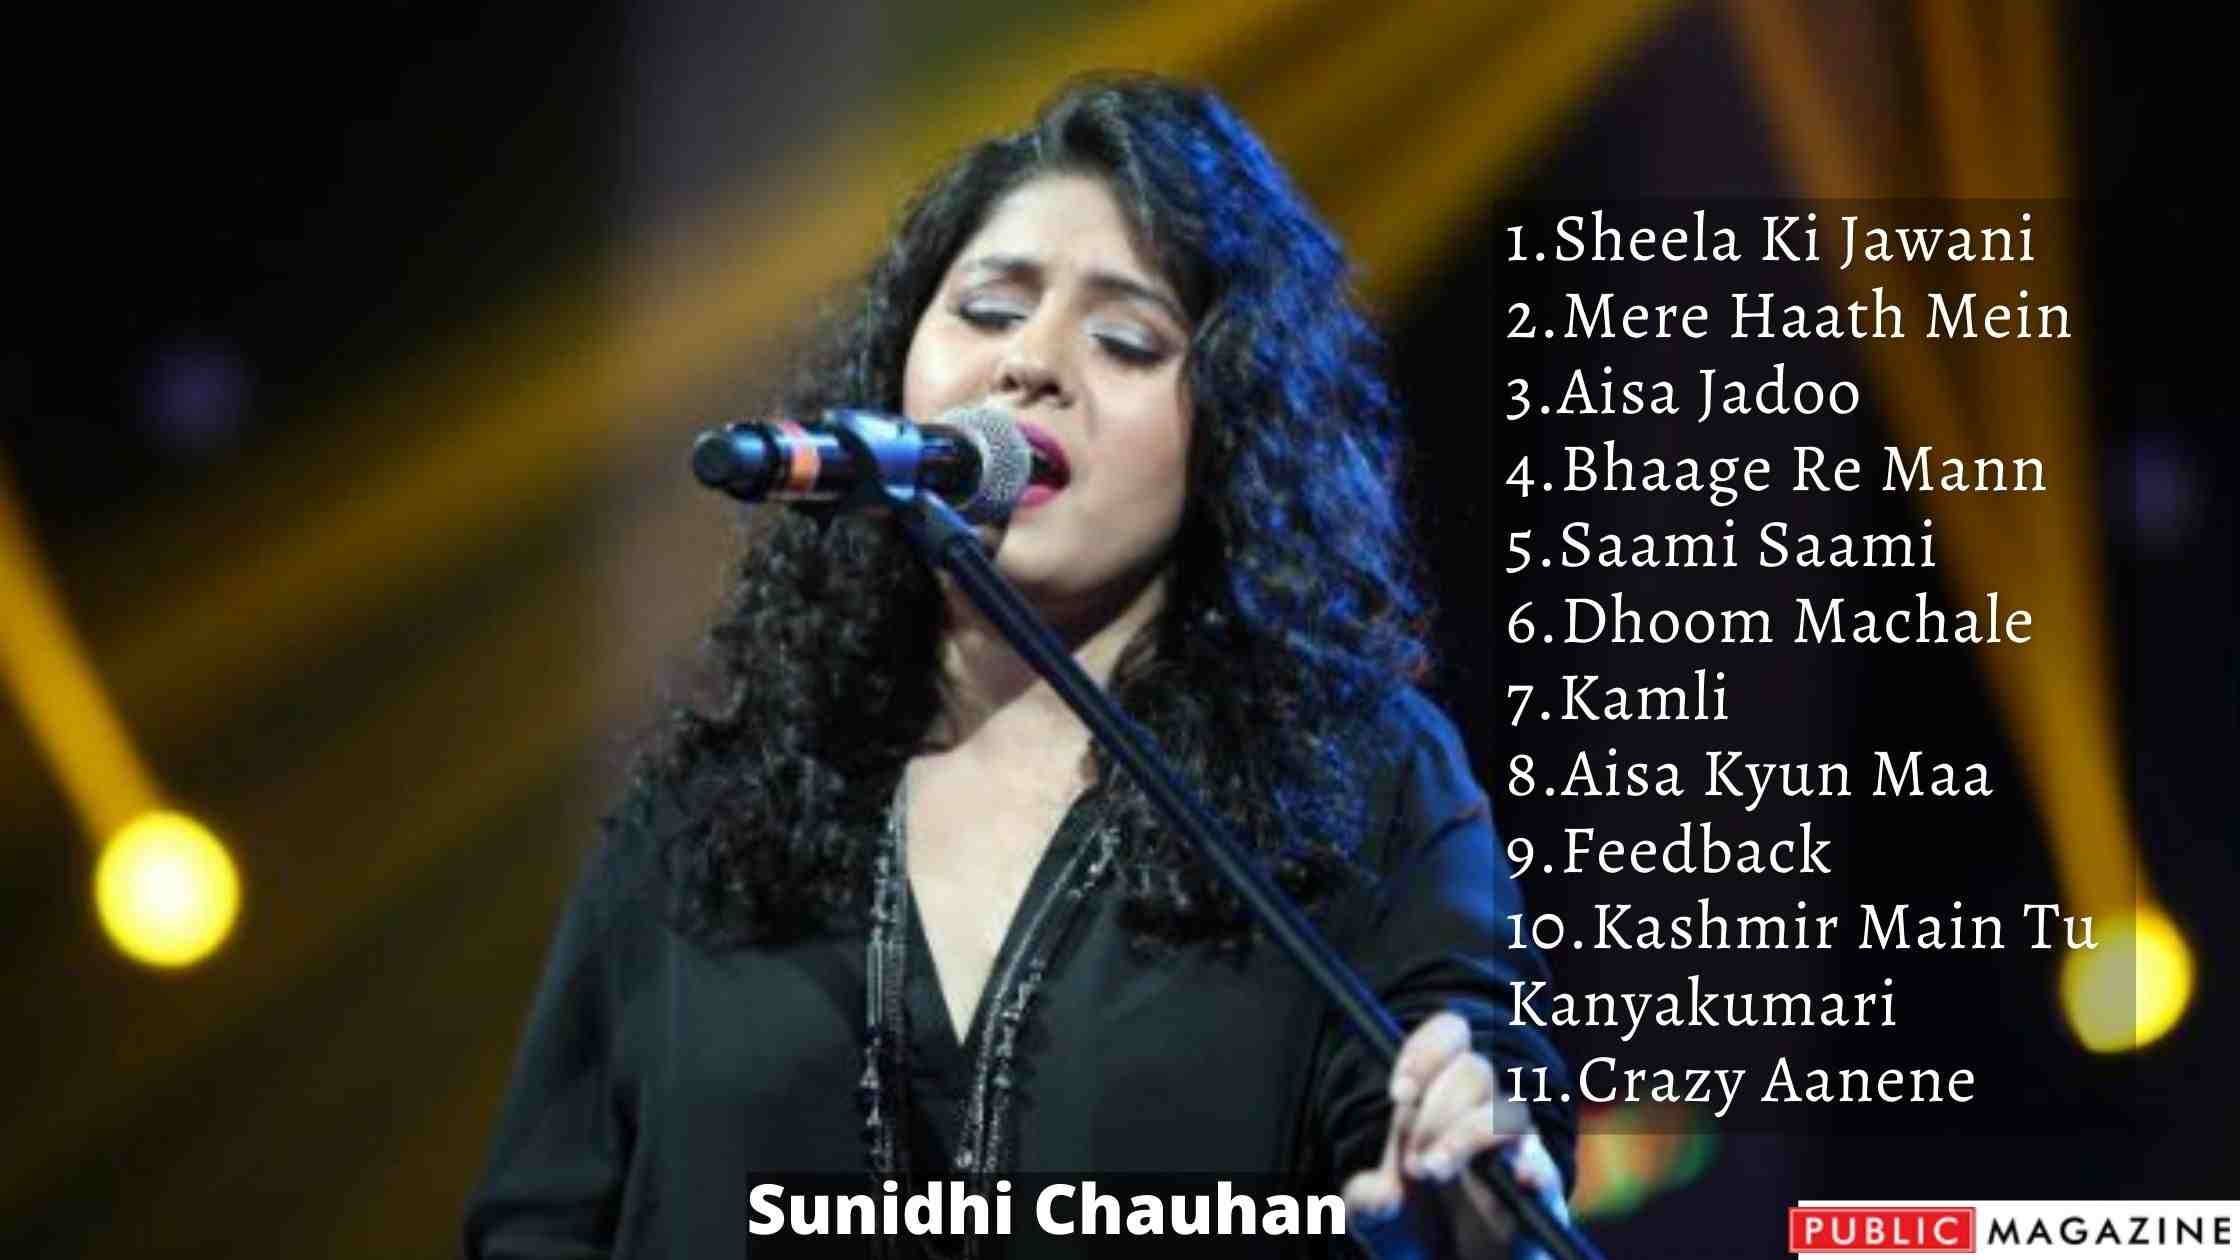 Sunidhi Chauhan Songs, Albums, Awards, Wiki And Biography